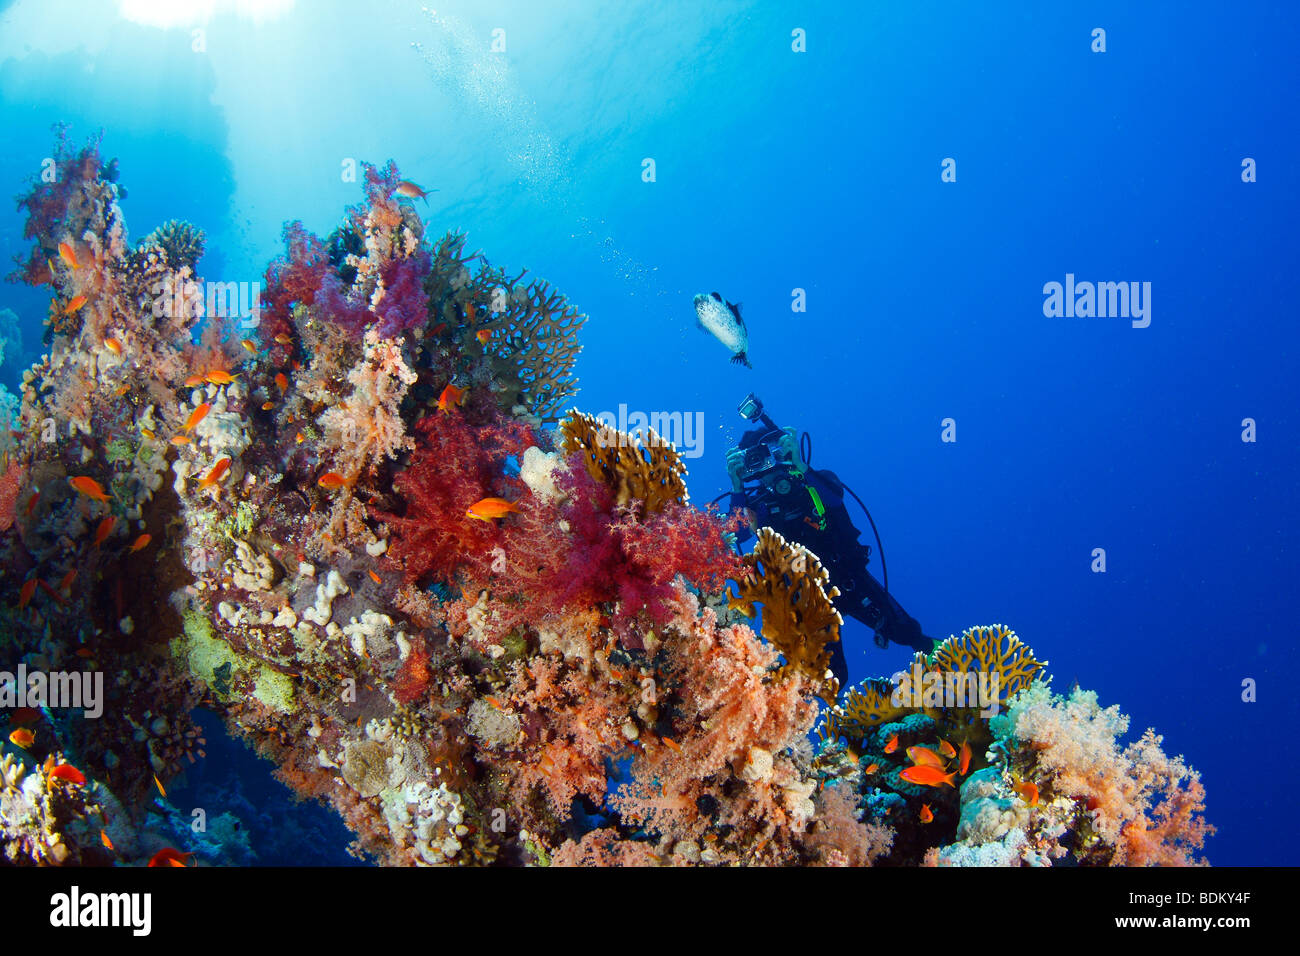 Young female diver photographer chasing puffer fish swimming over a coral reef with sun and water surface in the background. Stock Photo